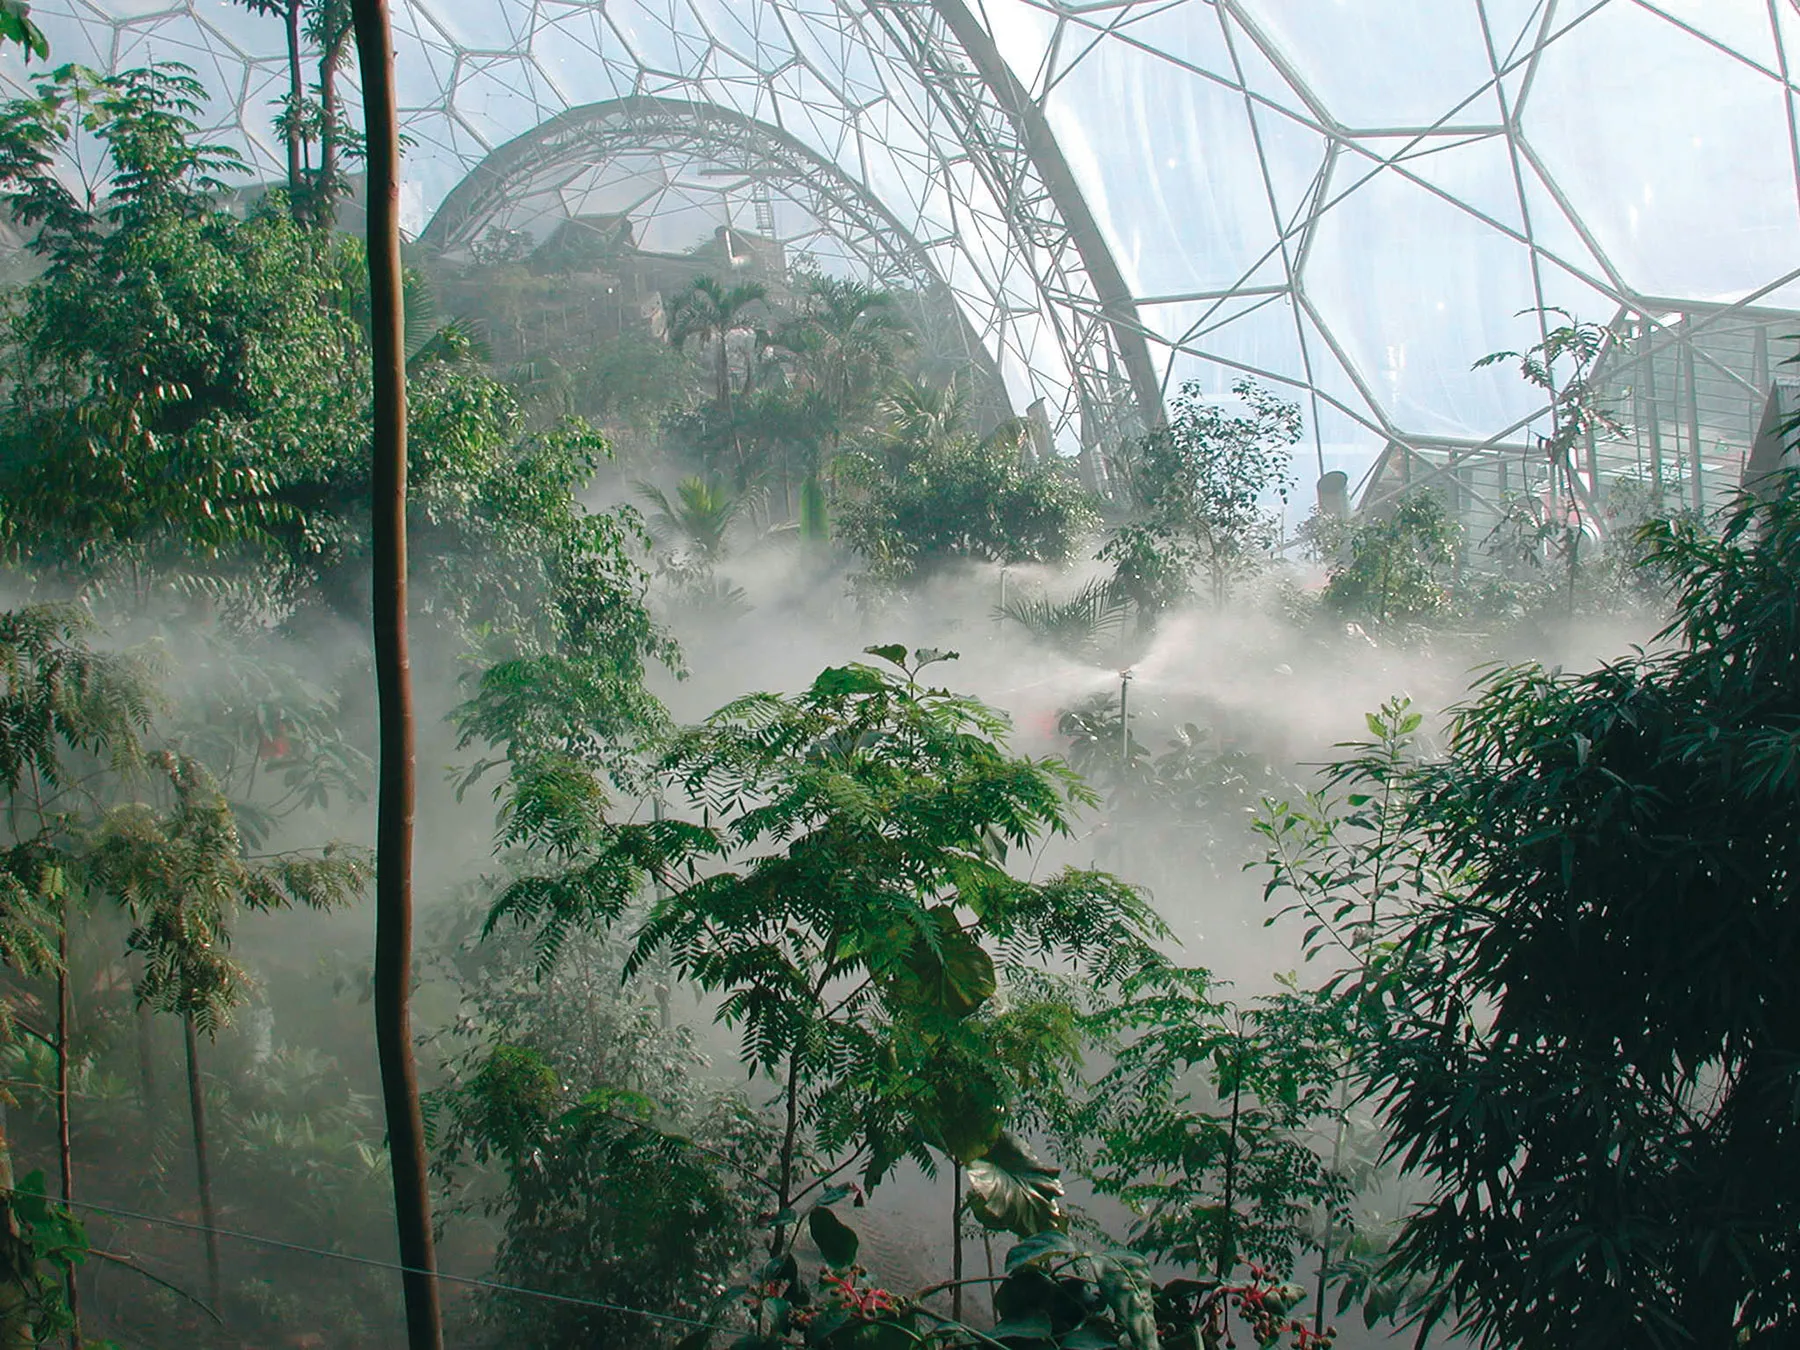 Biophilic Architecture Around the World - The Eden Project in Cornwall, UK